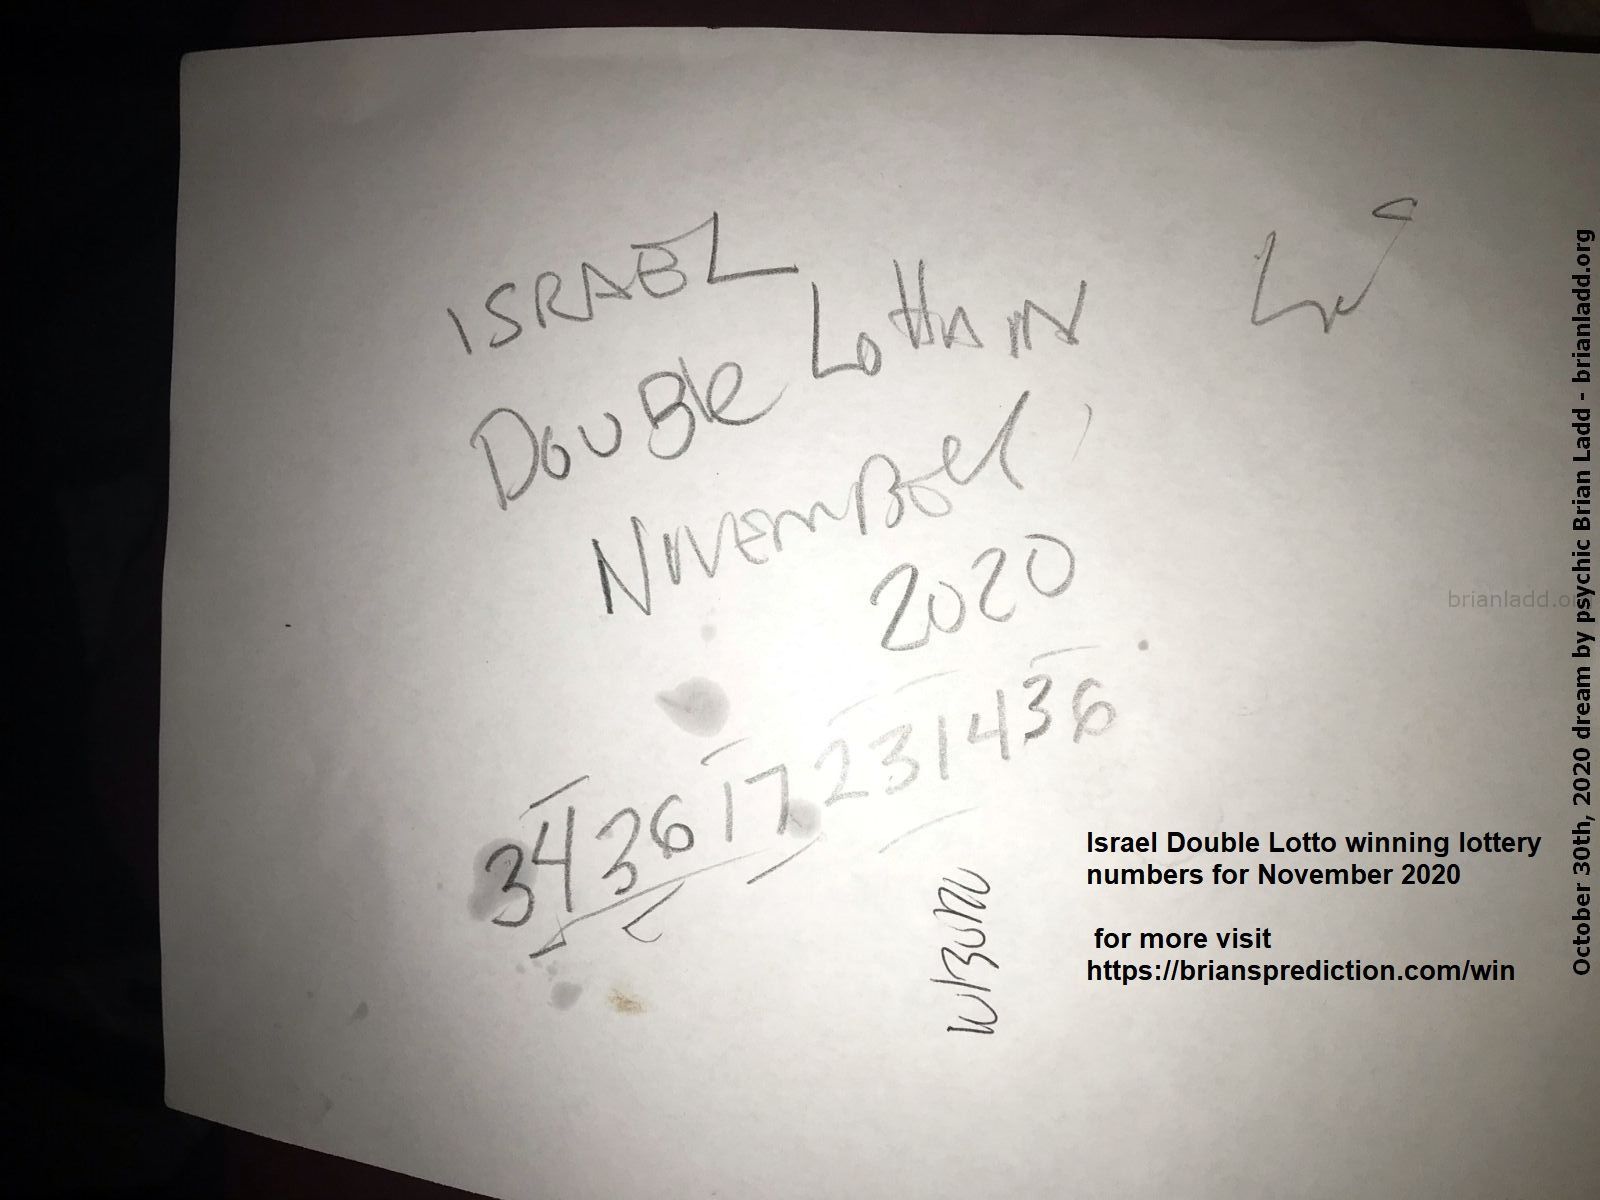 13954 30 October 2020 4 - Israel Double Lotto Winning Lottery Numbers For November 2020 For More Visit https://Briansp...
Israel Double Lotto Winning Lottery Numbers For November 2020 For More Visit  https://briansprediction.com/Win  ( NEW!  Free lottery picks by mail, I will personally fill out your blank lottery sheet and mail it back to you for free, postage is included!  visit  https://briansprediction.com/picksbymail   )
